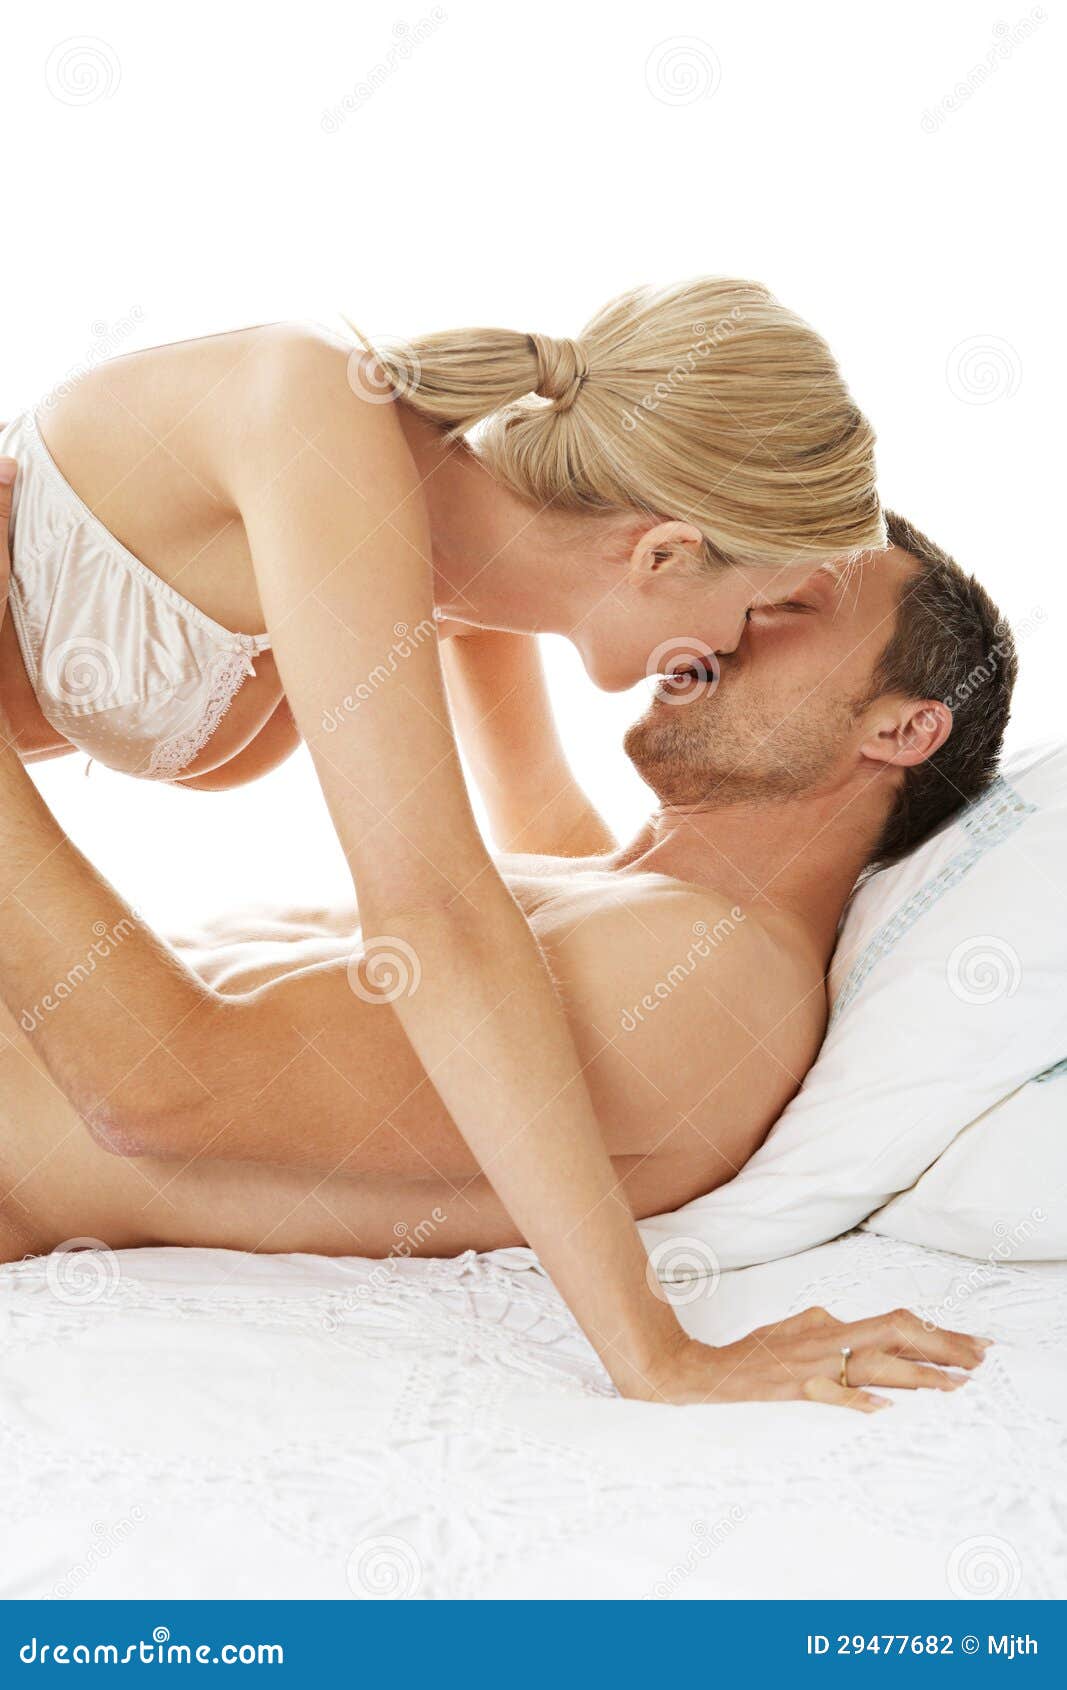 chuck chandler add hot couple on bed photo